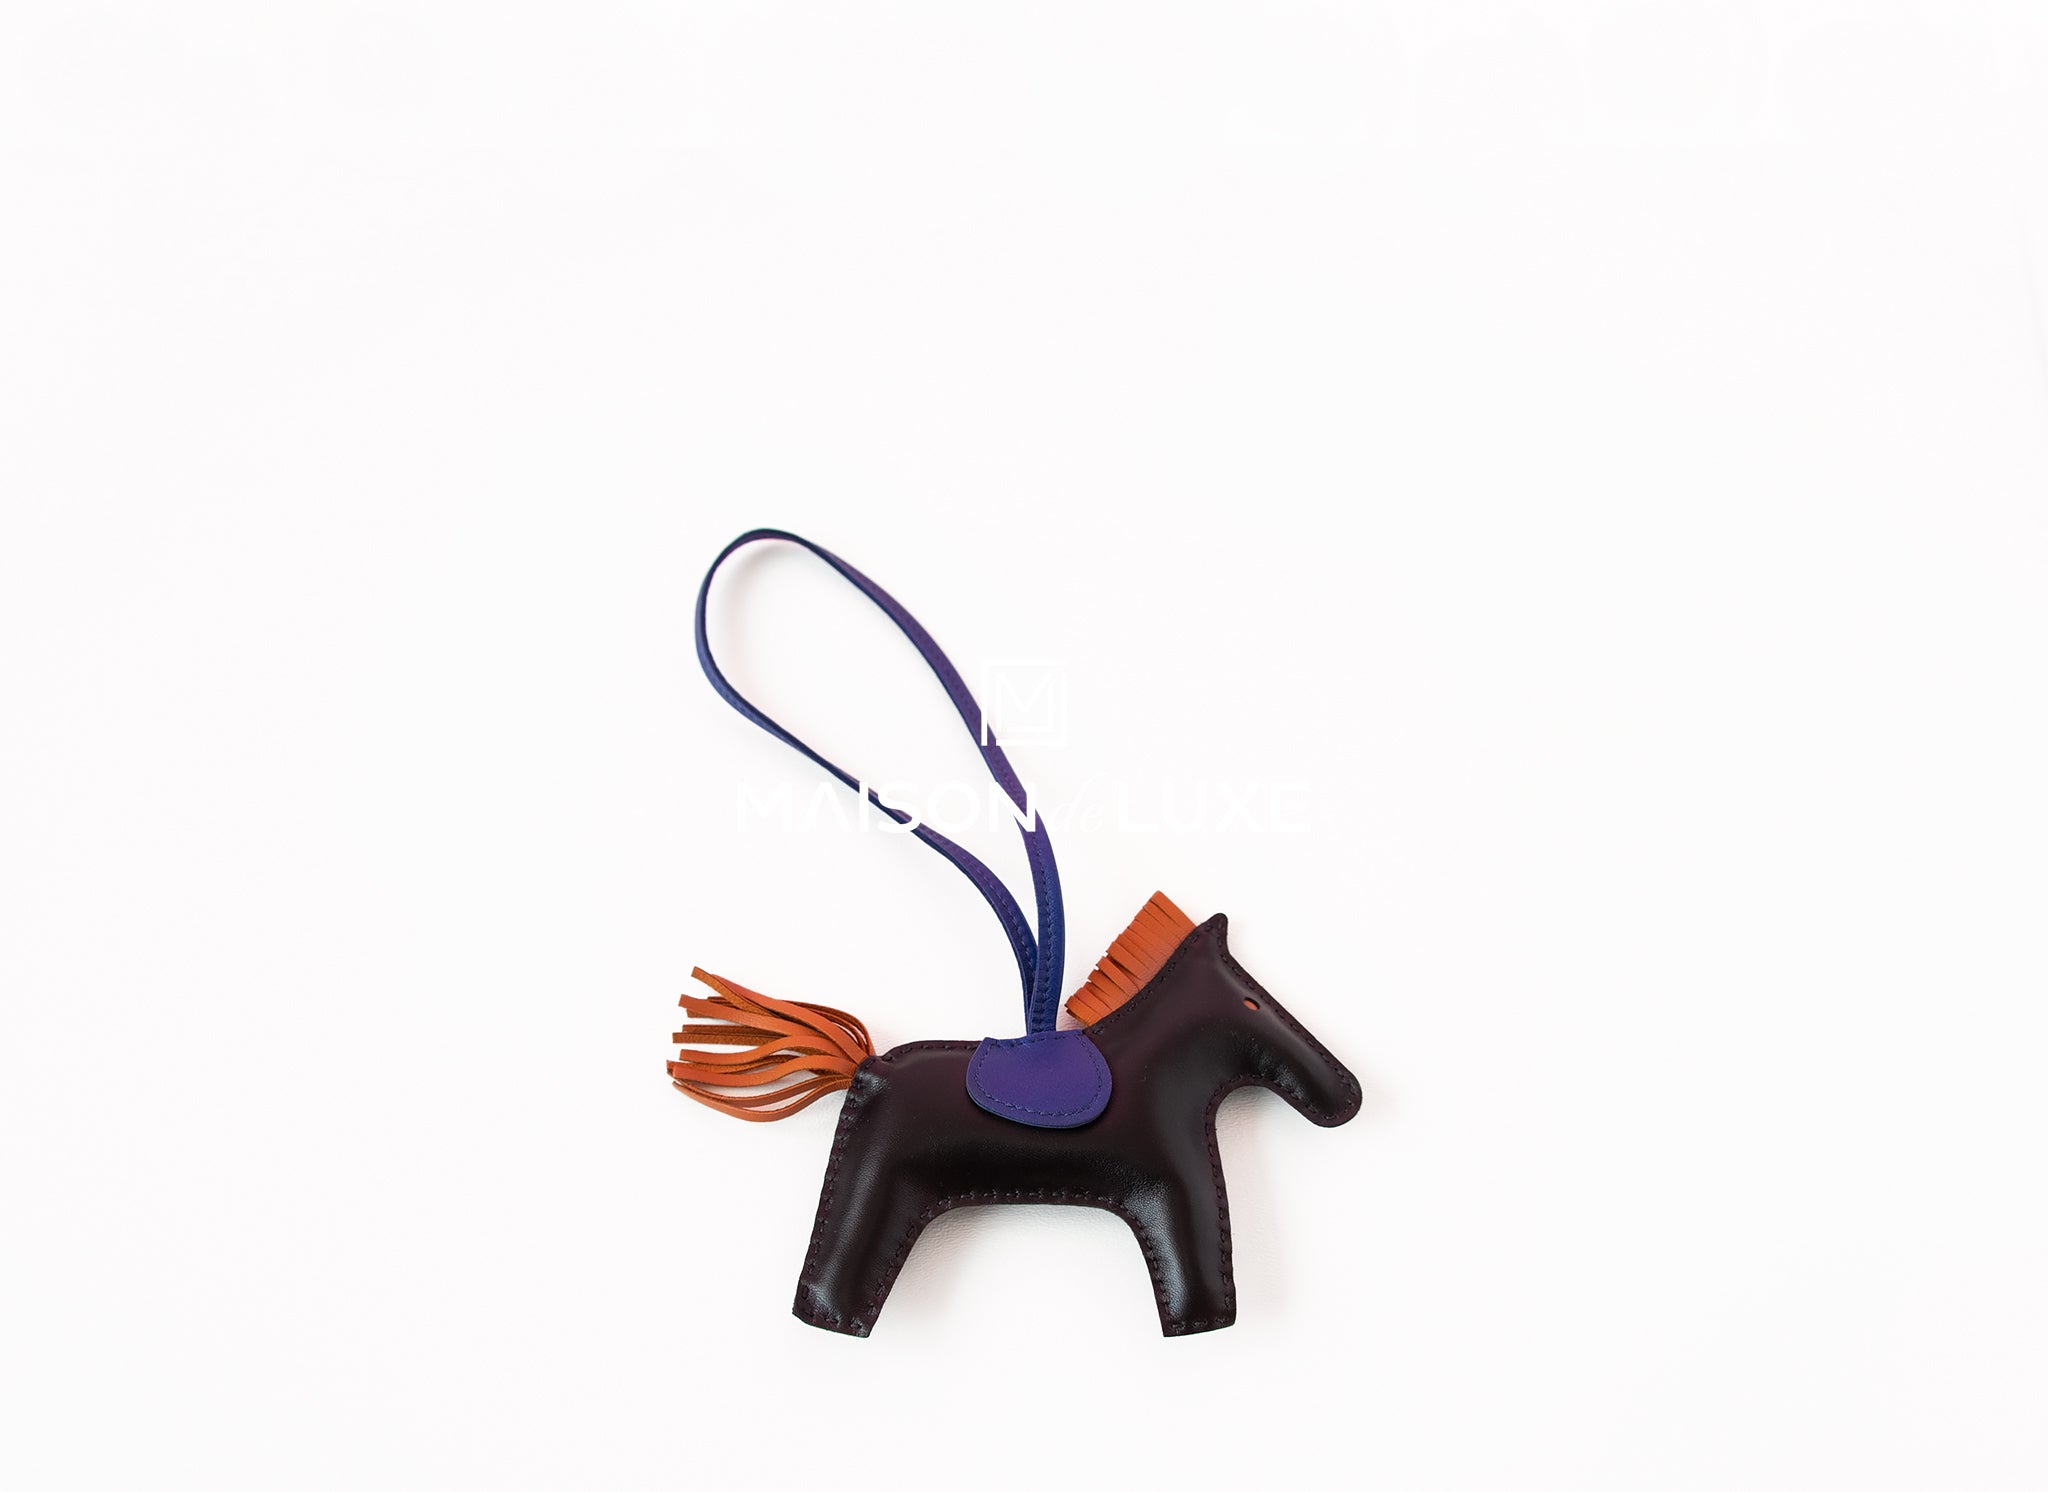 100% Authentic - Hermes Rodeo Pegase Bag Charm PM, So Black, 2022 Product